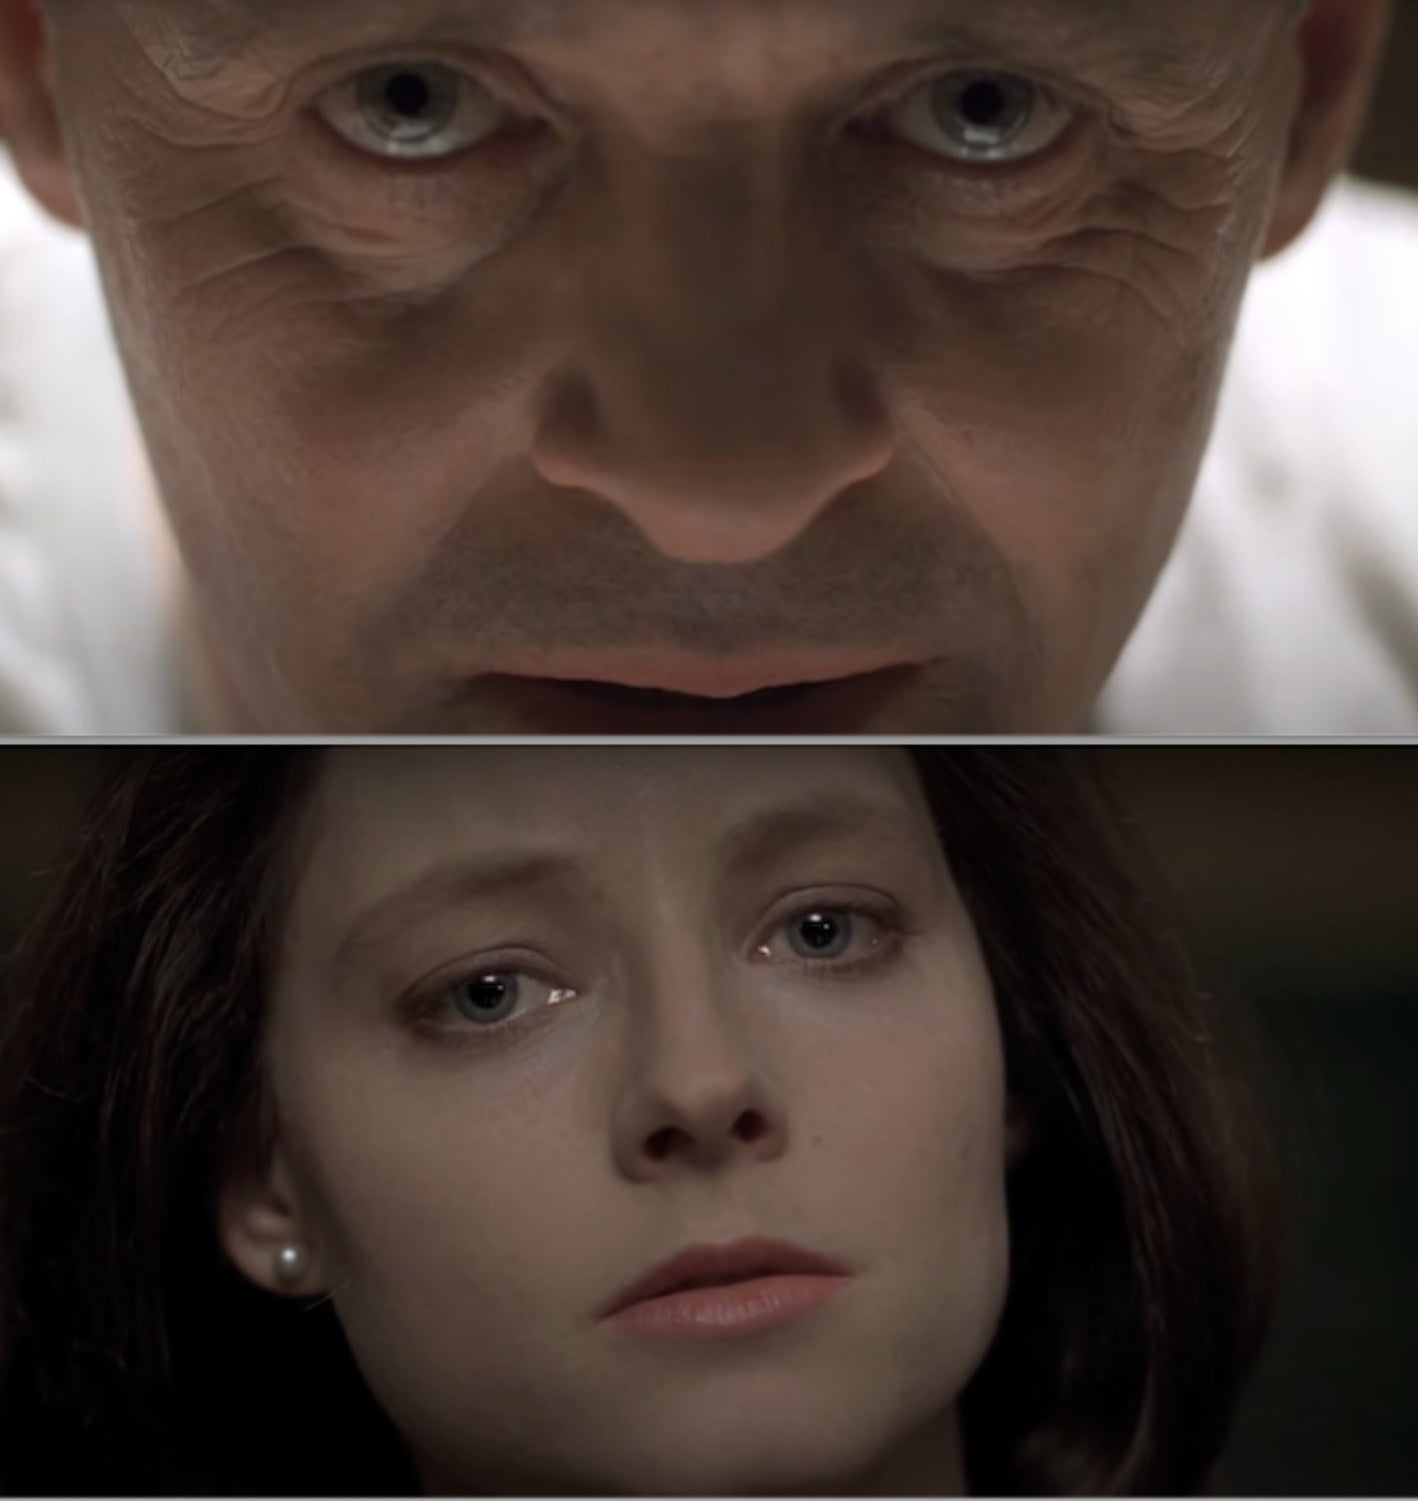 Clarice talking to Dr. Lecter in his cell in the movie